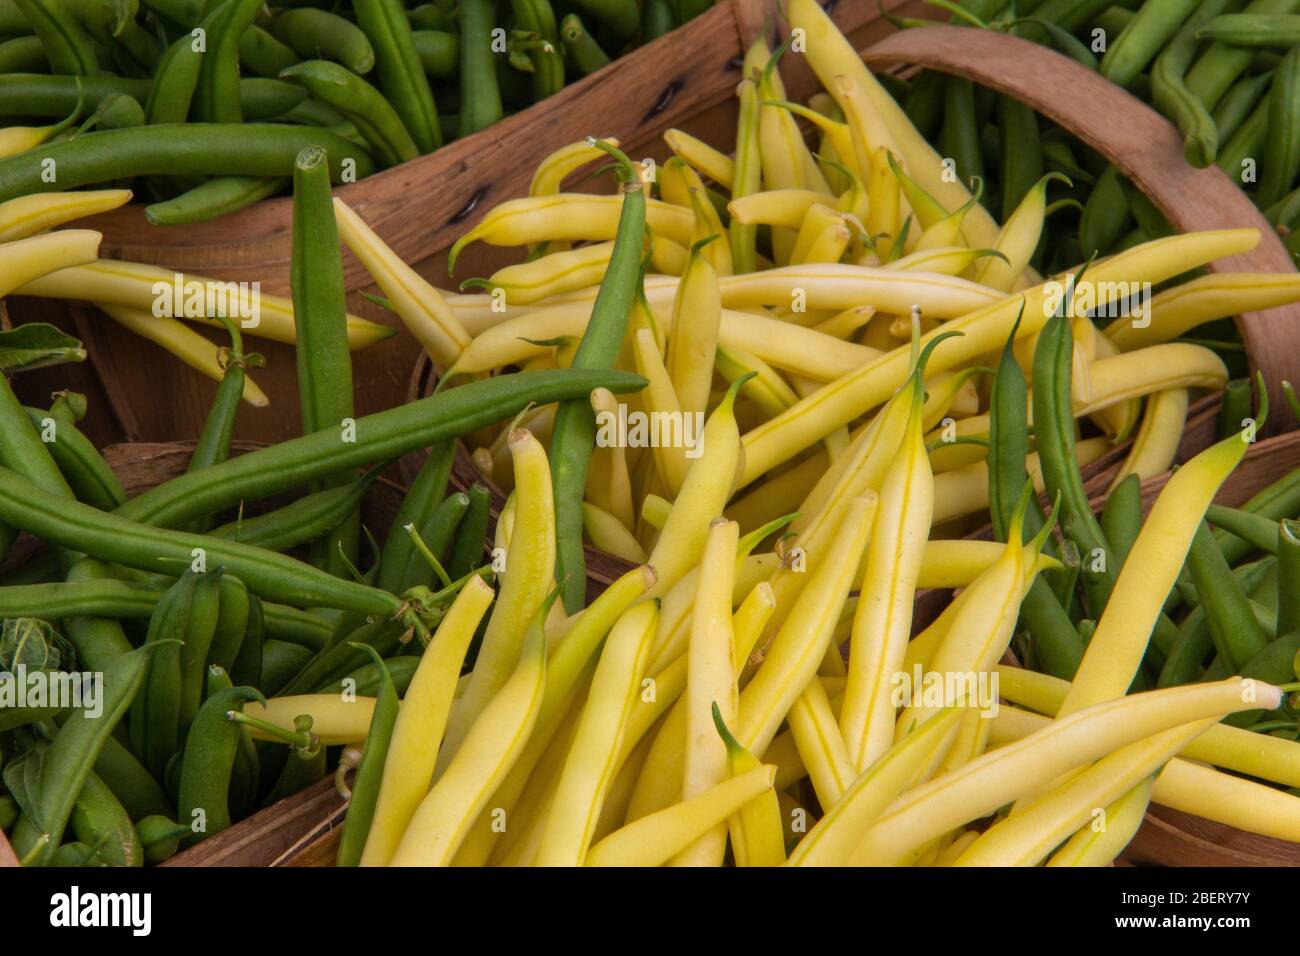 Baskets of yellow and green beans Stock Photo